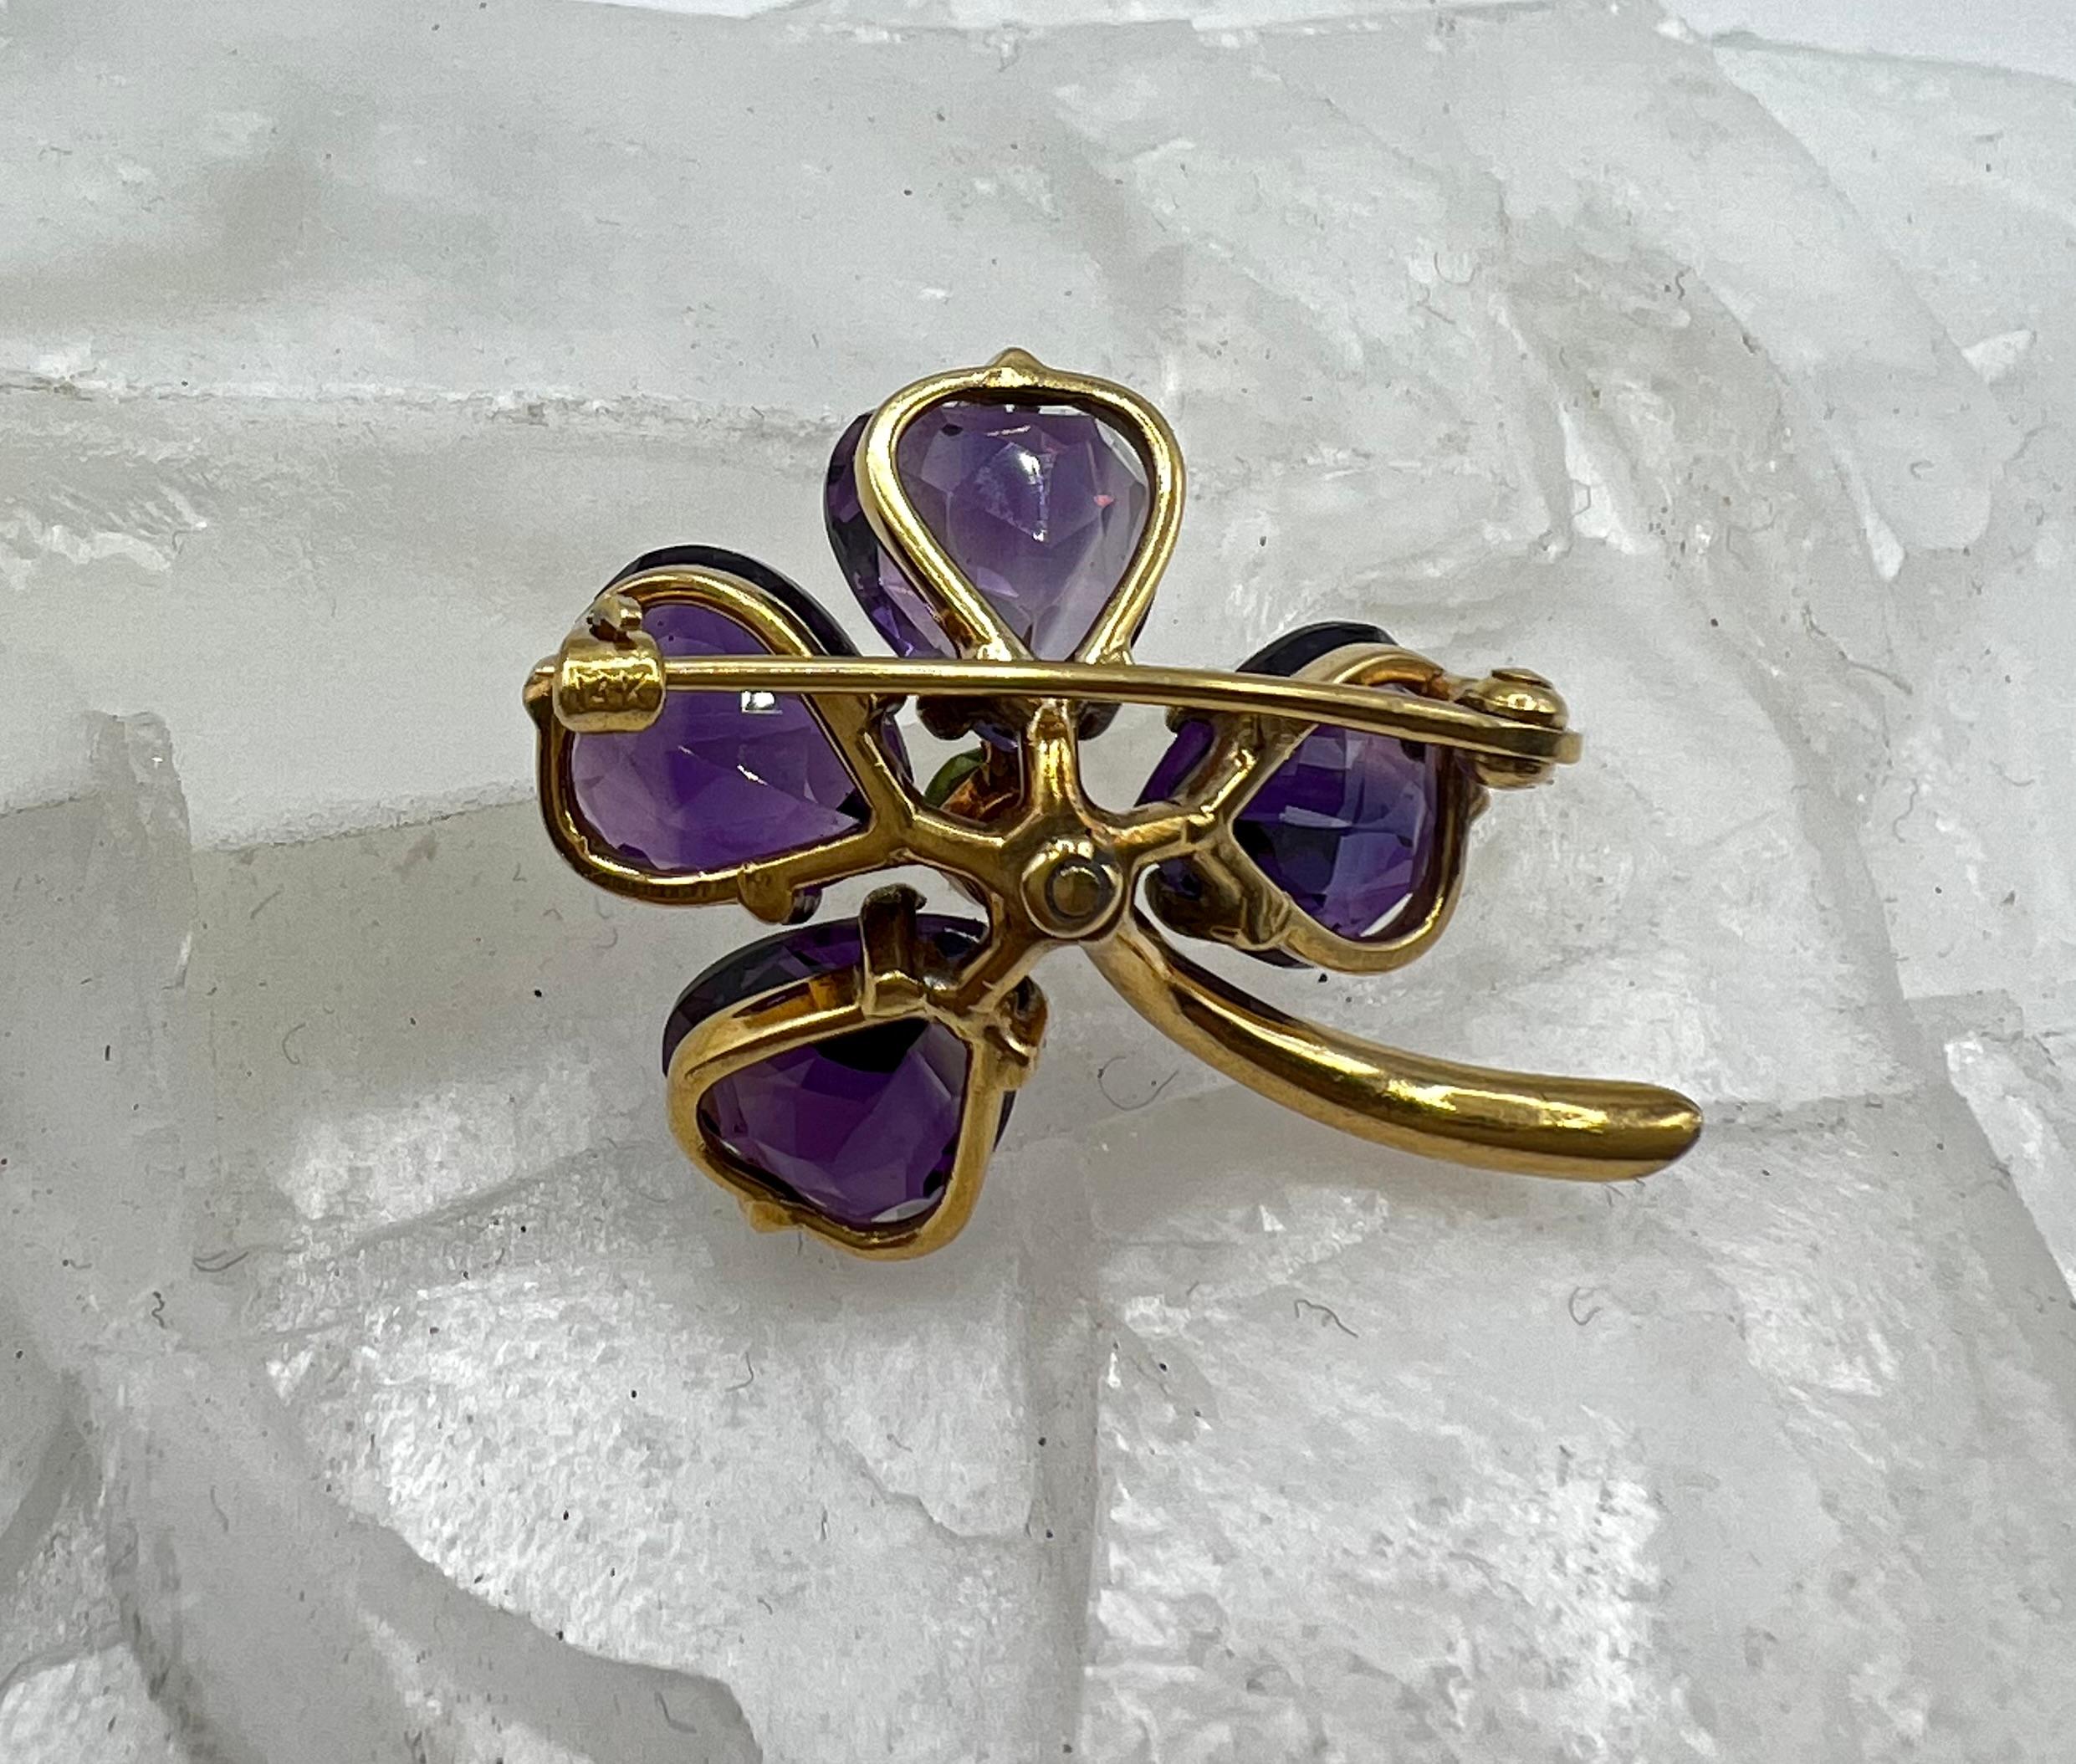 This sweet brooch is a lovely addition to a flora collection of jewels. The center green demantoid garnet is offset by beautifully faceted amethyst petals. The entire floral setting is 18 karat yellow gold for a beautiful contrast. This is a